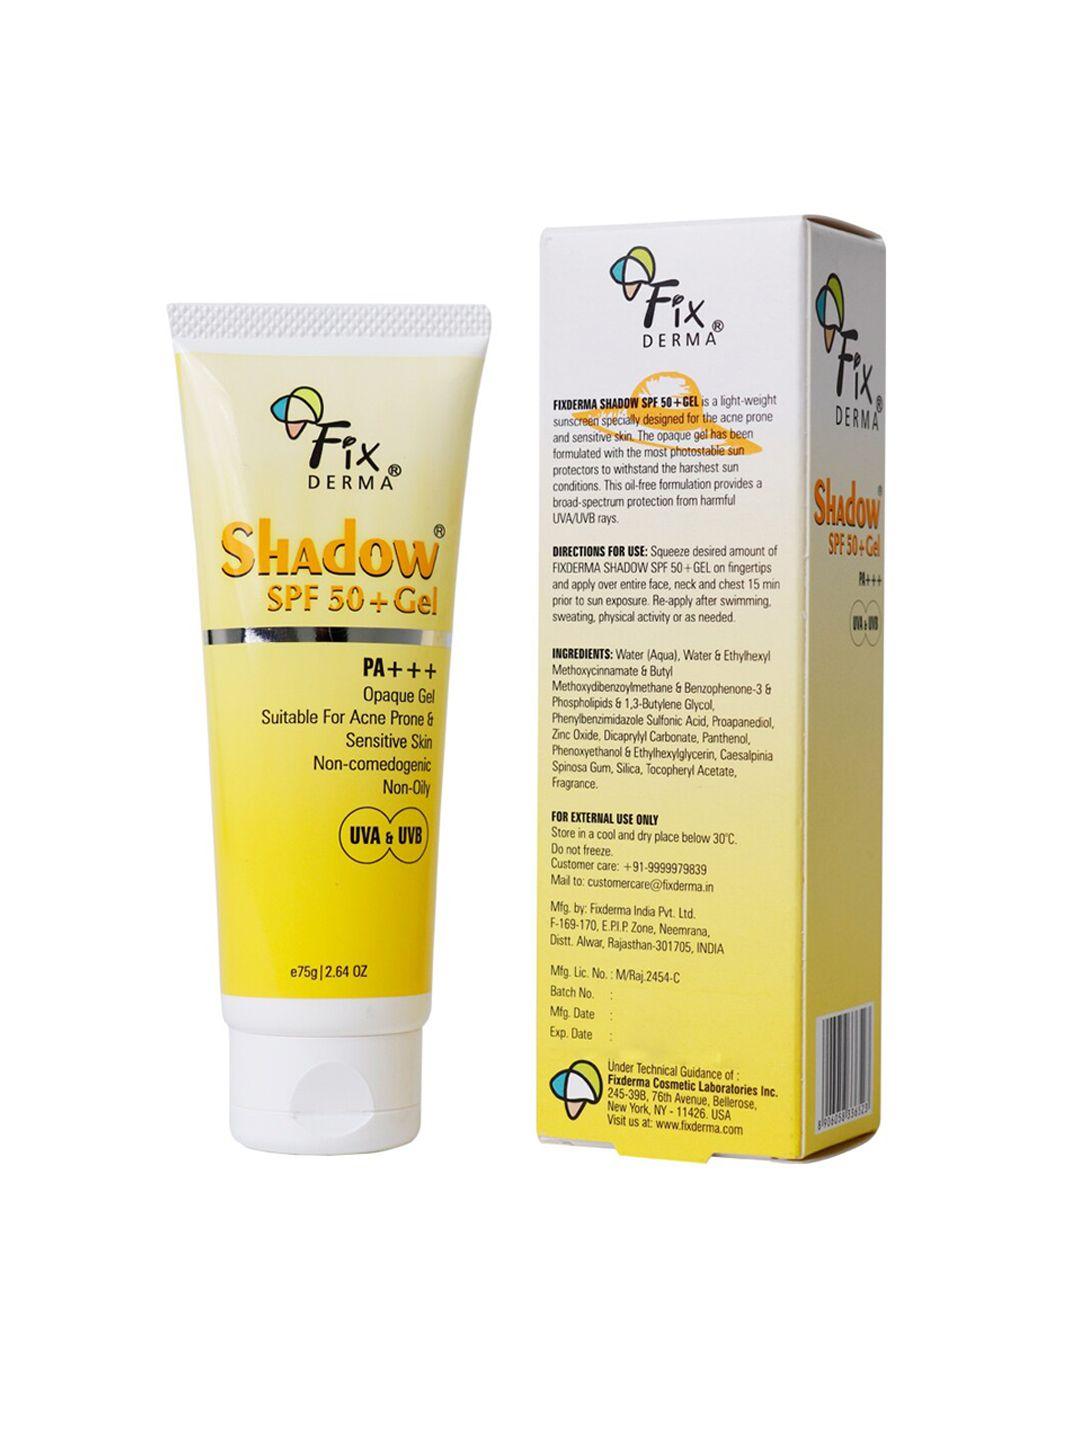 fixderma-shadow-sunscreen-spf-50+-gel-for-oily-acne-prone-skin-with-pa+++-protection---75g